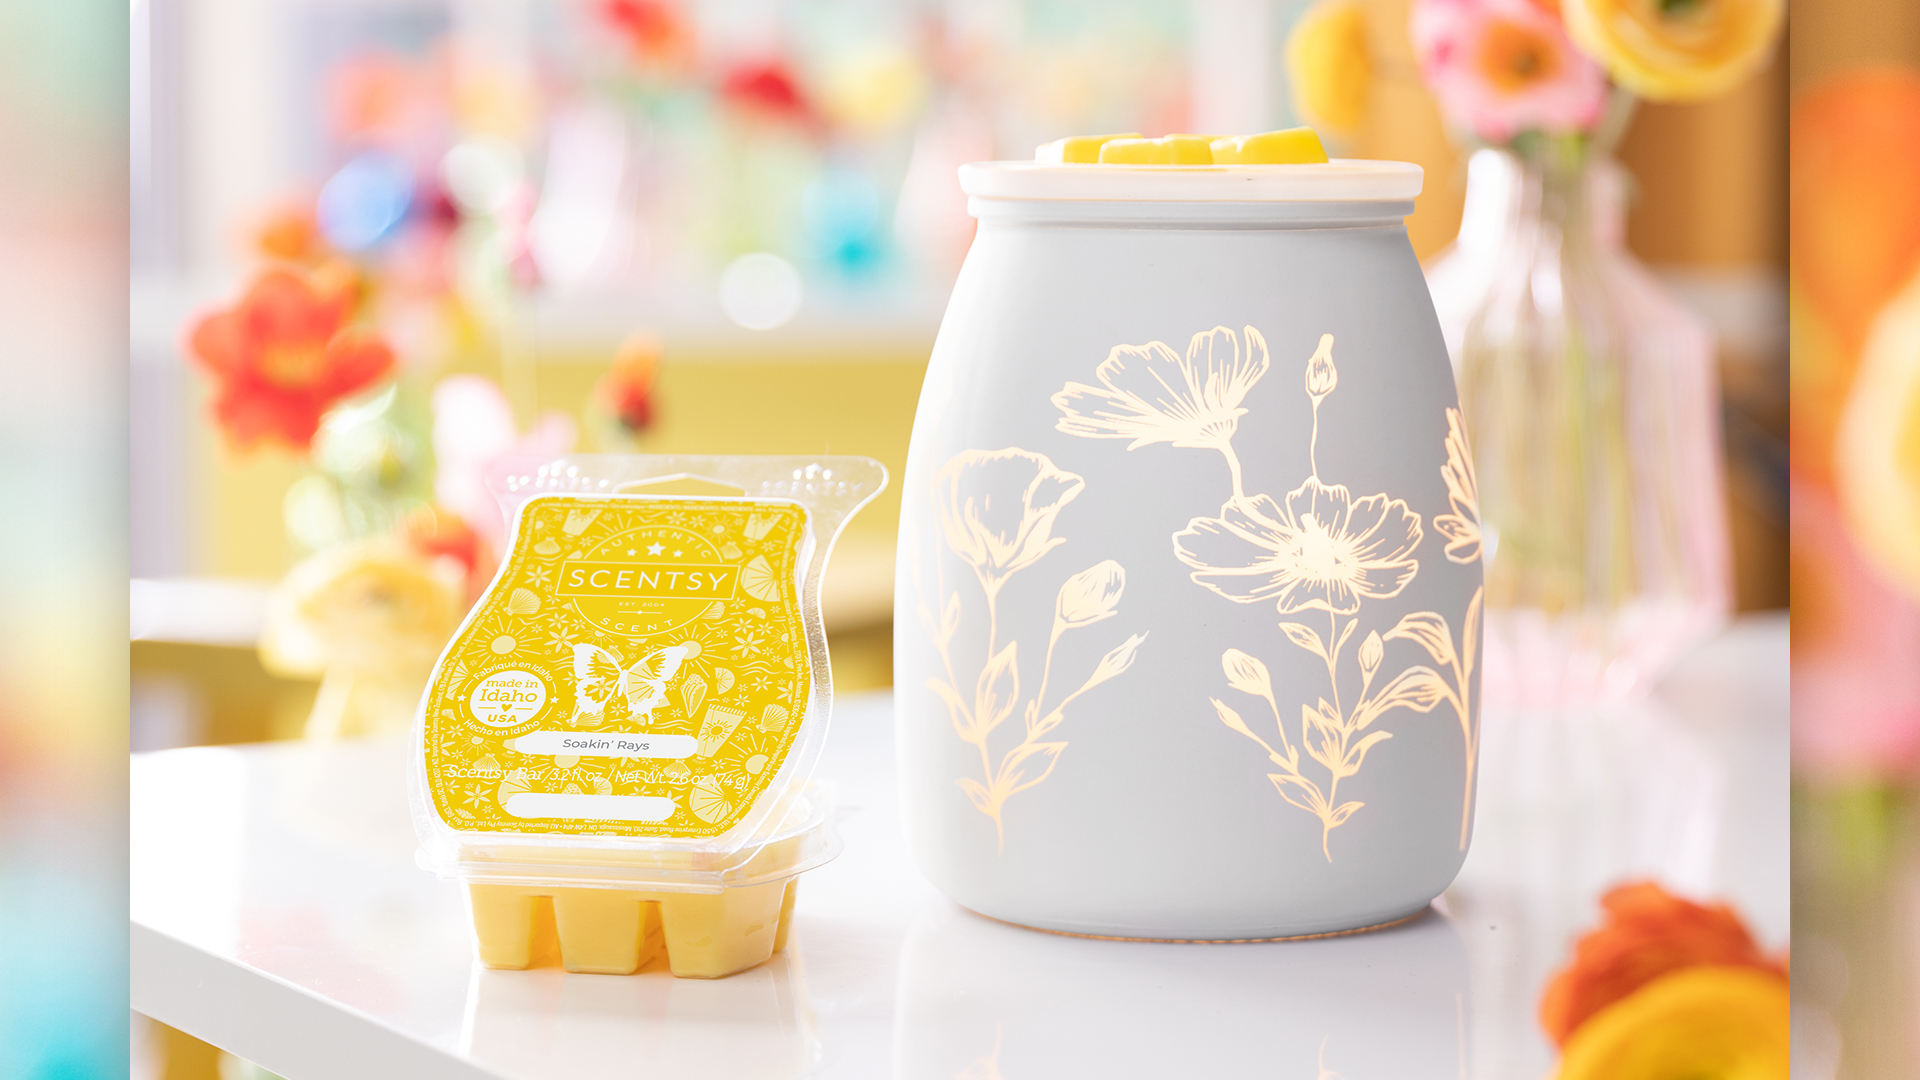 Scentsy's Flower Garden wax warmer and a Soakin' Rays scented wax bar sitting on a white table with a vase of flowers blurred in the background